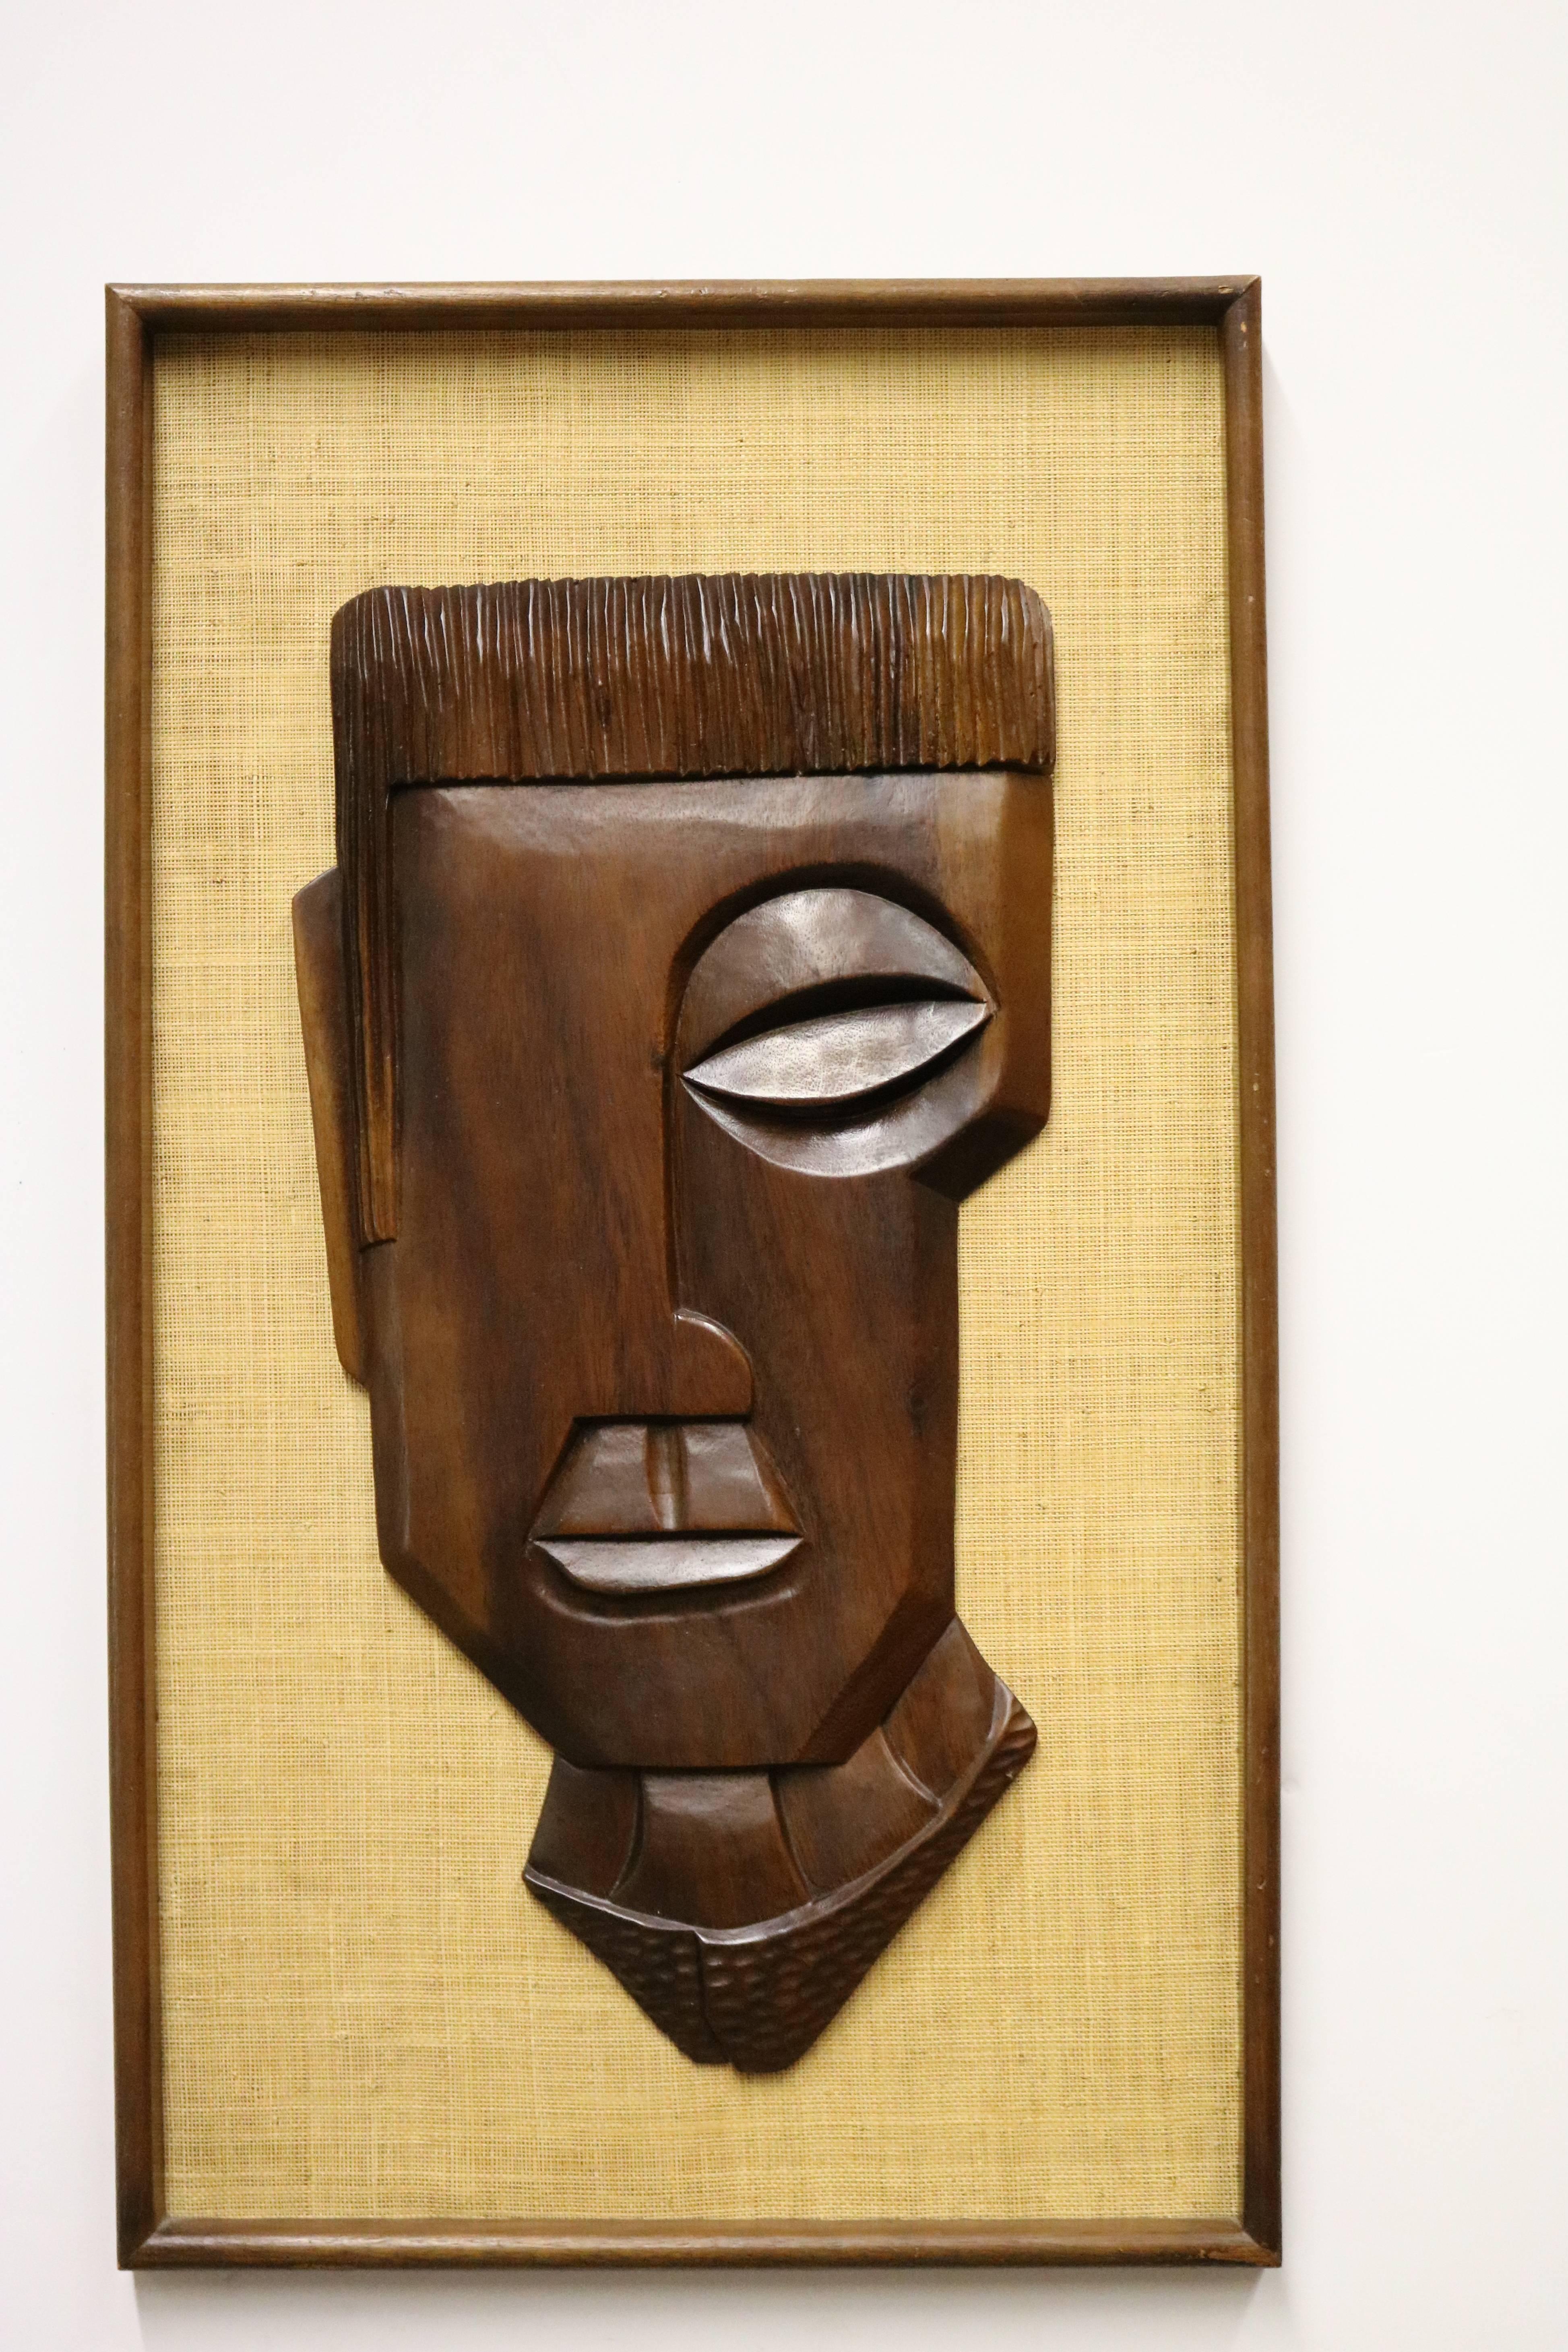 Pair of framed wood carvings of male and female faces mounted on burlap; each is completed flat on the back and secured to the burlap.
Appear to be African in origin but we cannot name an exact region.